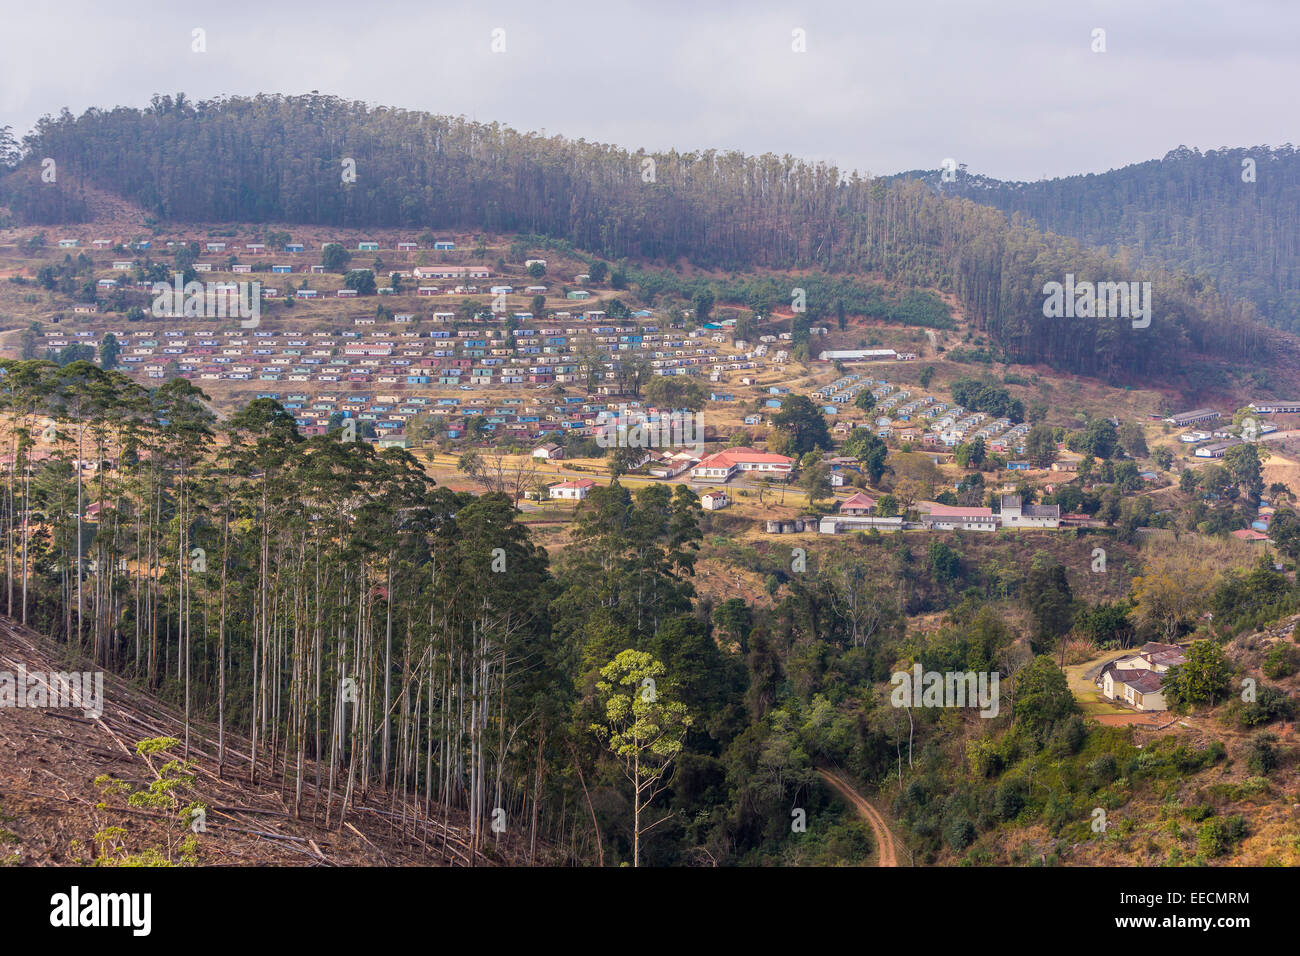 BULEMBU, SWAZILAND, AFRICA - Worker housing in former asbestos mining town, now largely unoccupied. Stock Photo